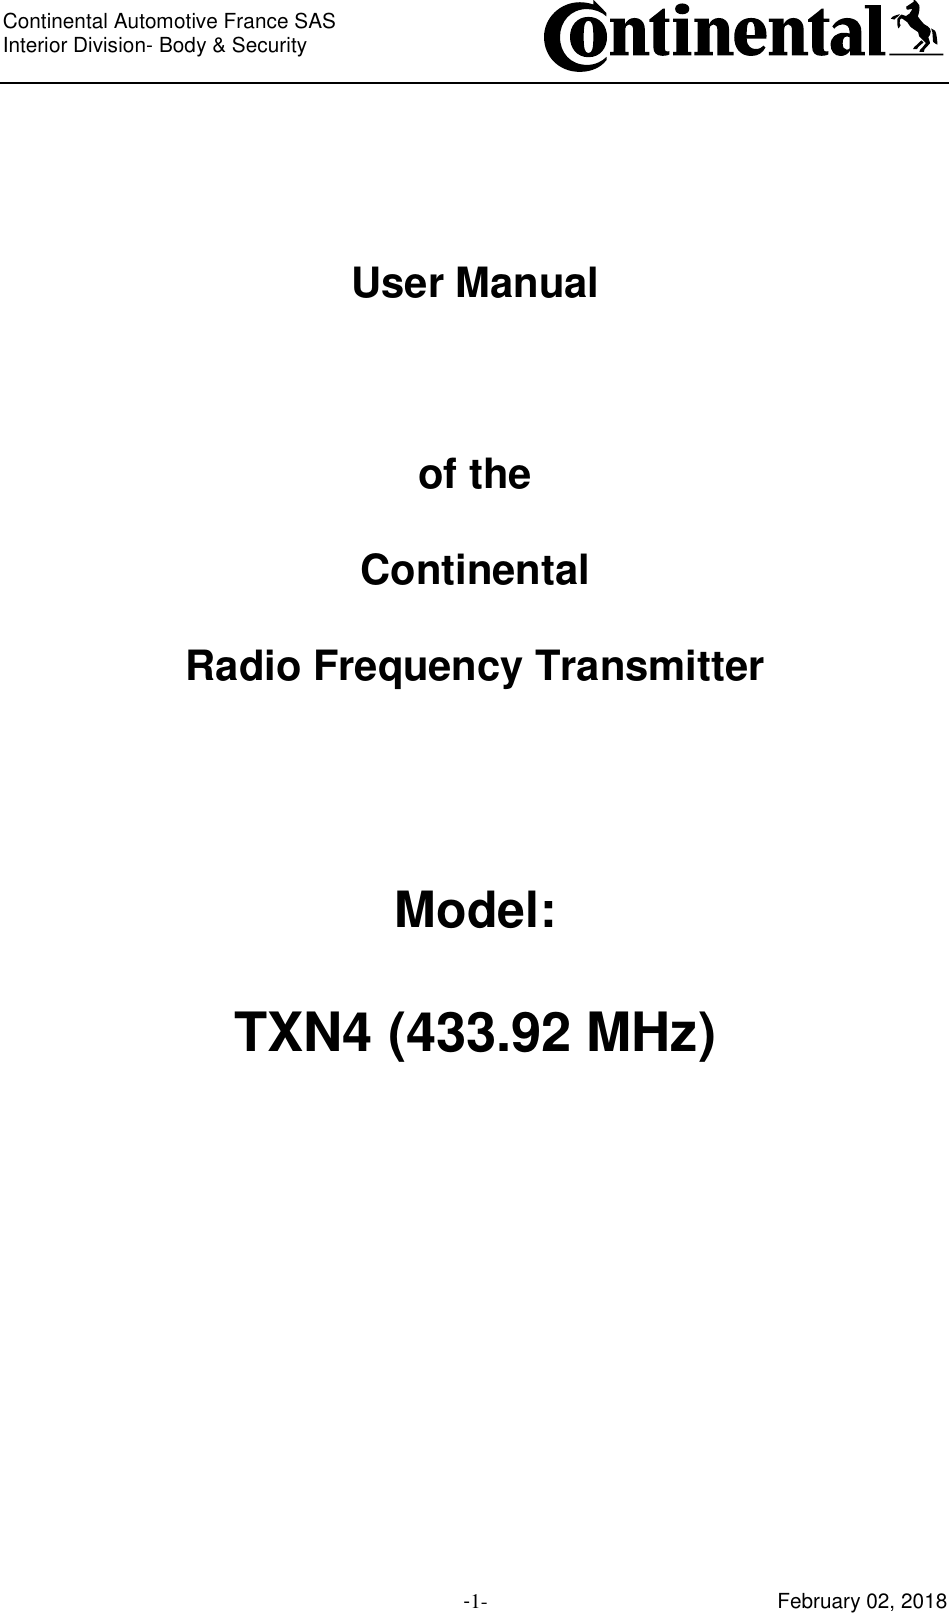 Continental Automotive France SAS     Interior Division- Body &amp; Security         -1- February 02, 2018     User Manual    of the  Continental  Radio Frequency Transmitter     Model:  TXN4 (433.92 MHz)      